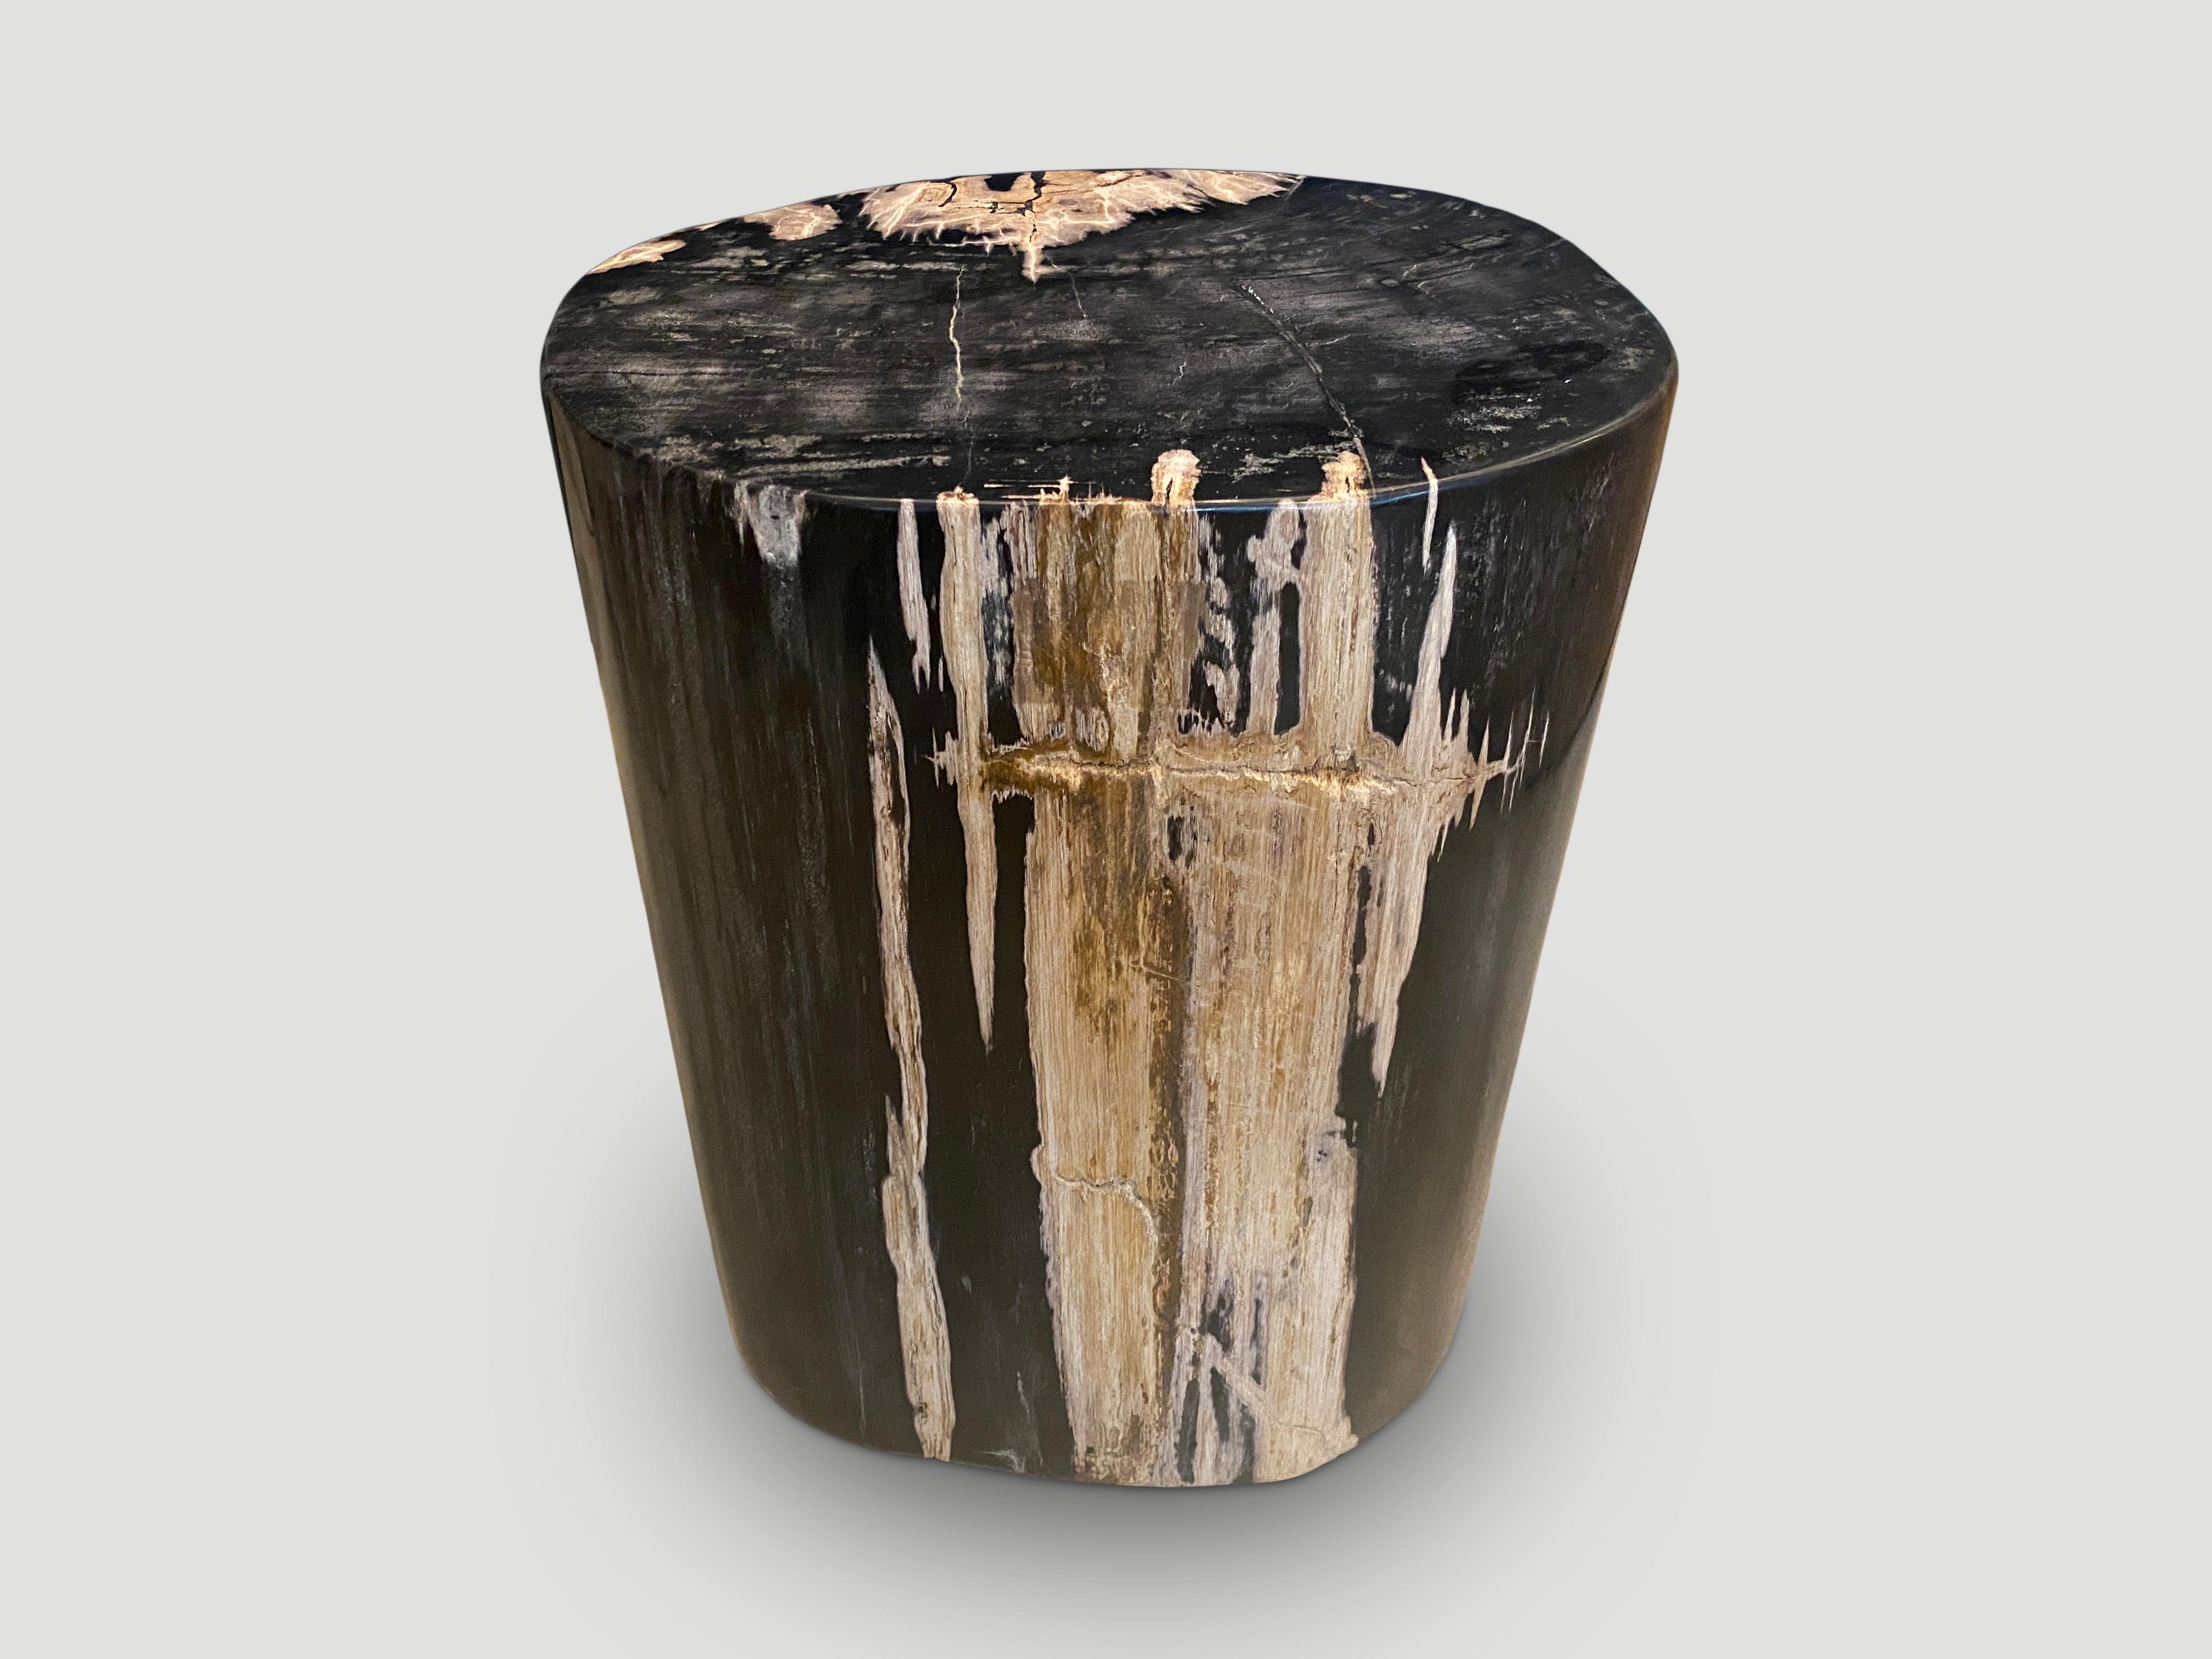 Impressive beautiful contrasting tones on this high quality super smooth petrified wood side table. It’s fascinating how Mother Nature produces these stunning 40 million year old petrified teak logs with such contrasting colors and natural patterns